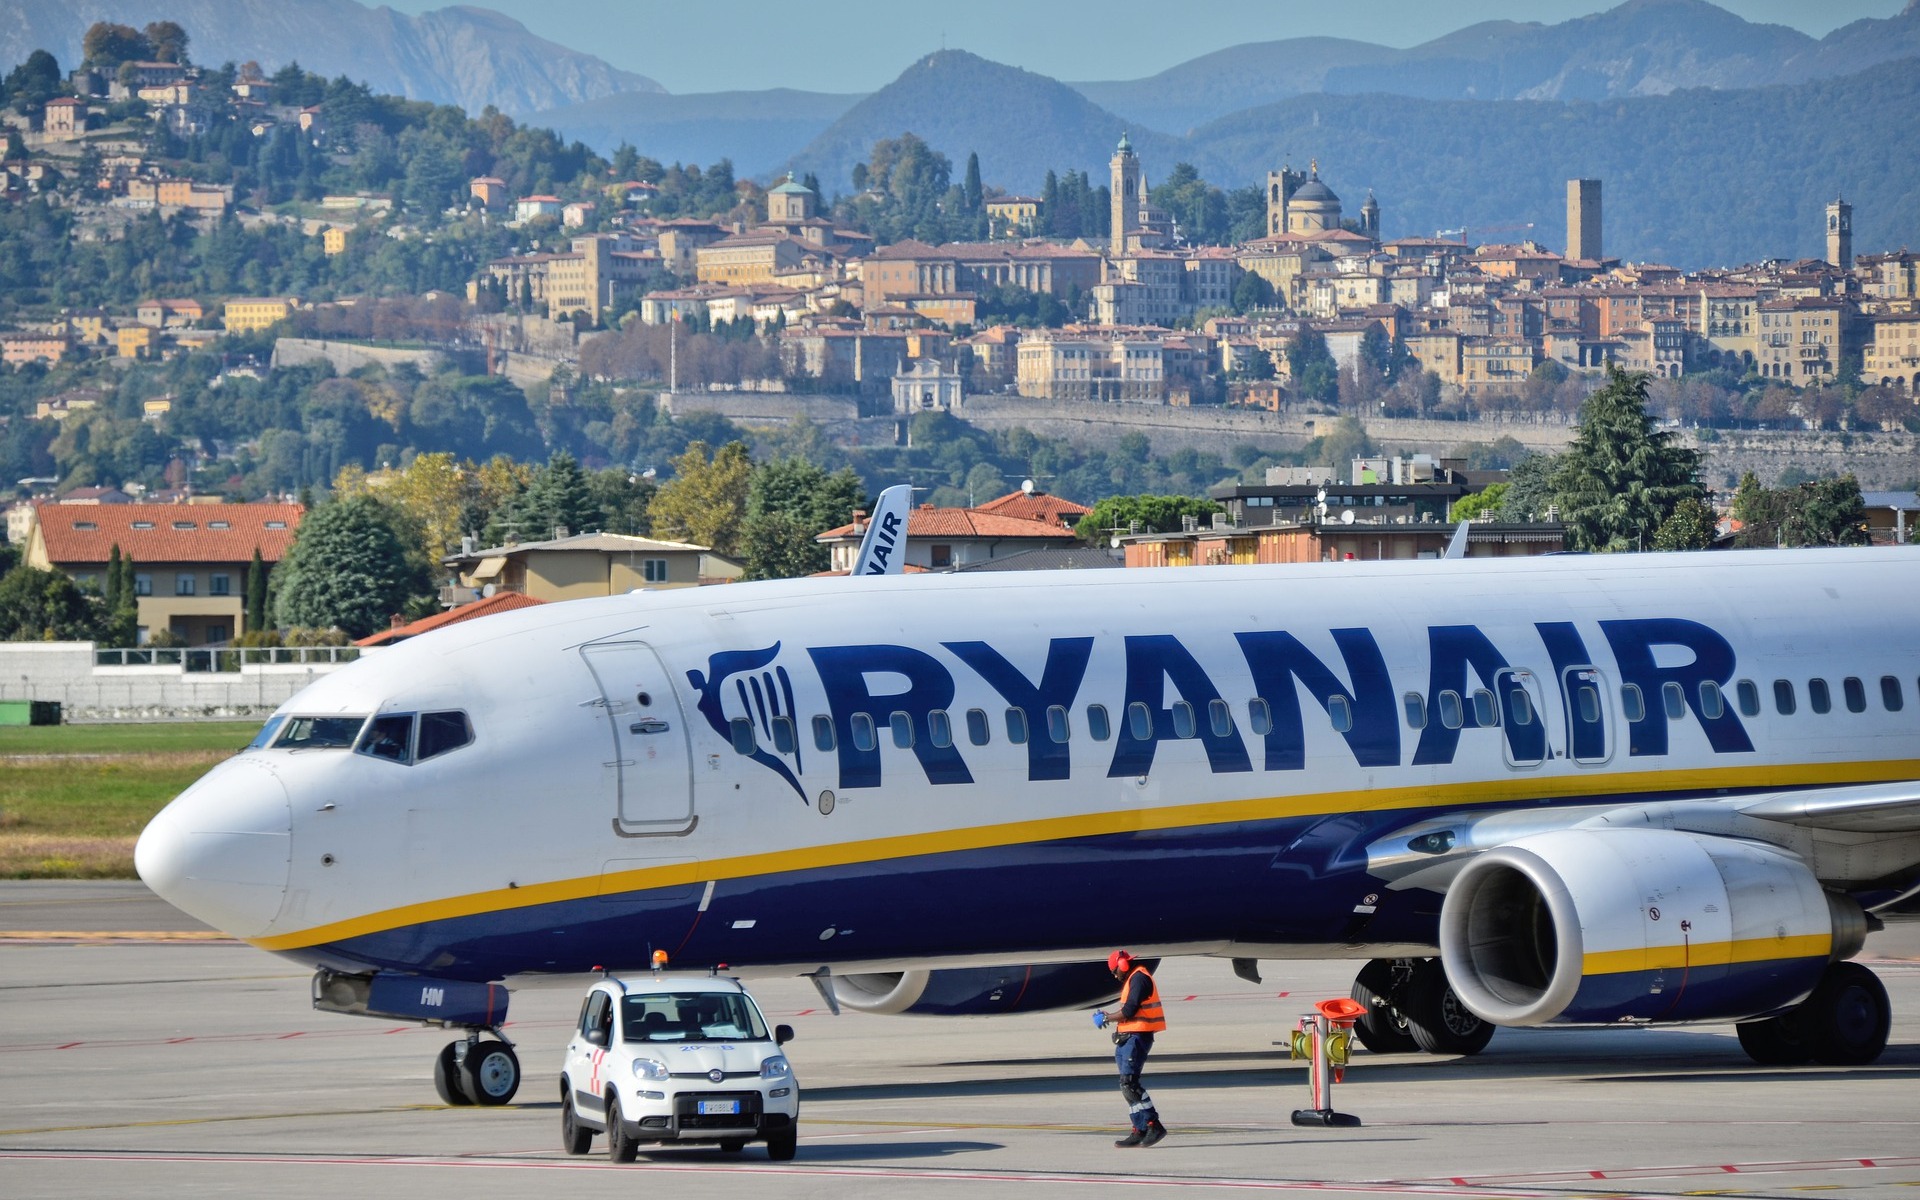 A side-on view of a Ryanair plane on the runway. Behind the plane is a city in the distance.